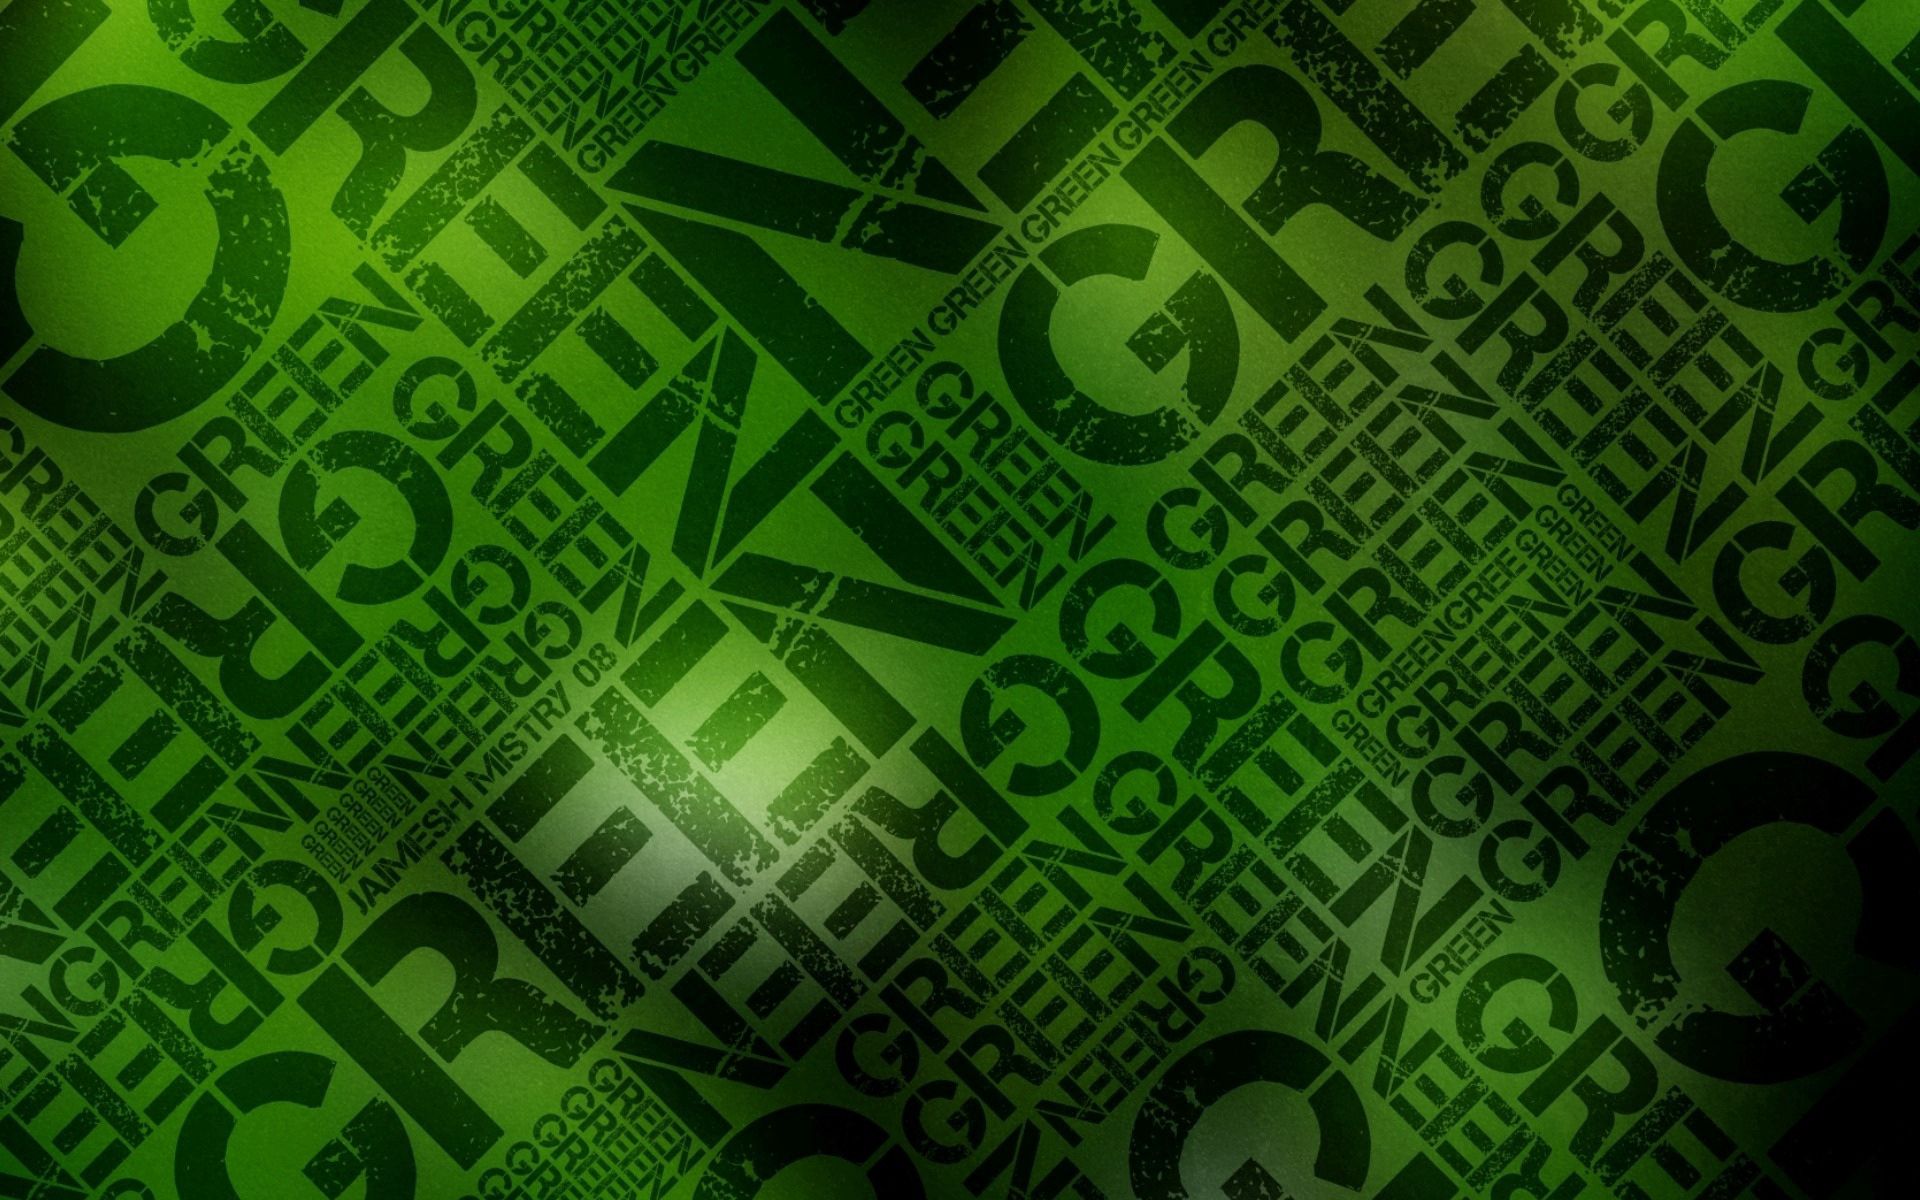 141762 download wallpaper letters, texture, black, green, textures, wall, inscription screensavers and pictures for free